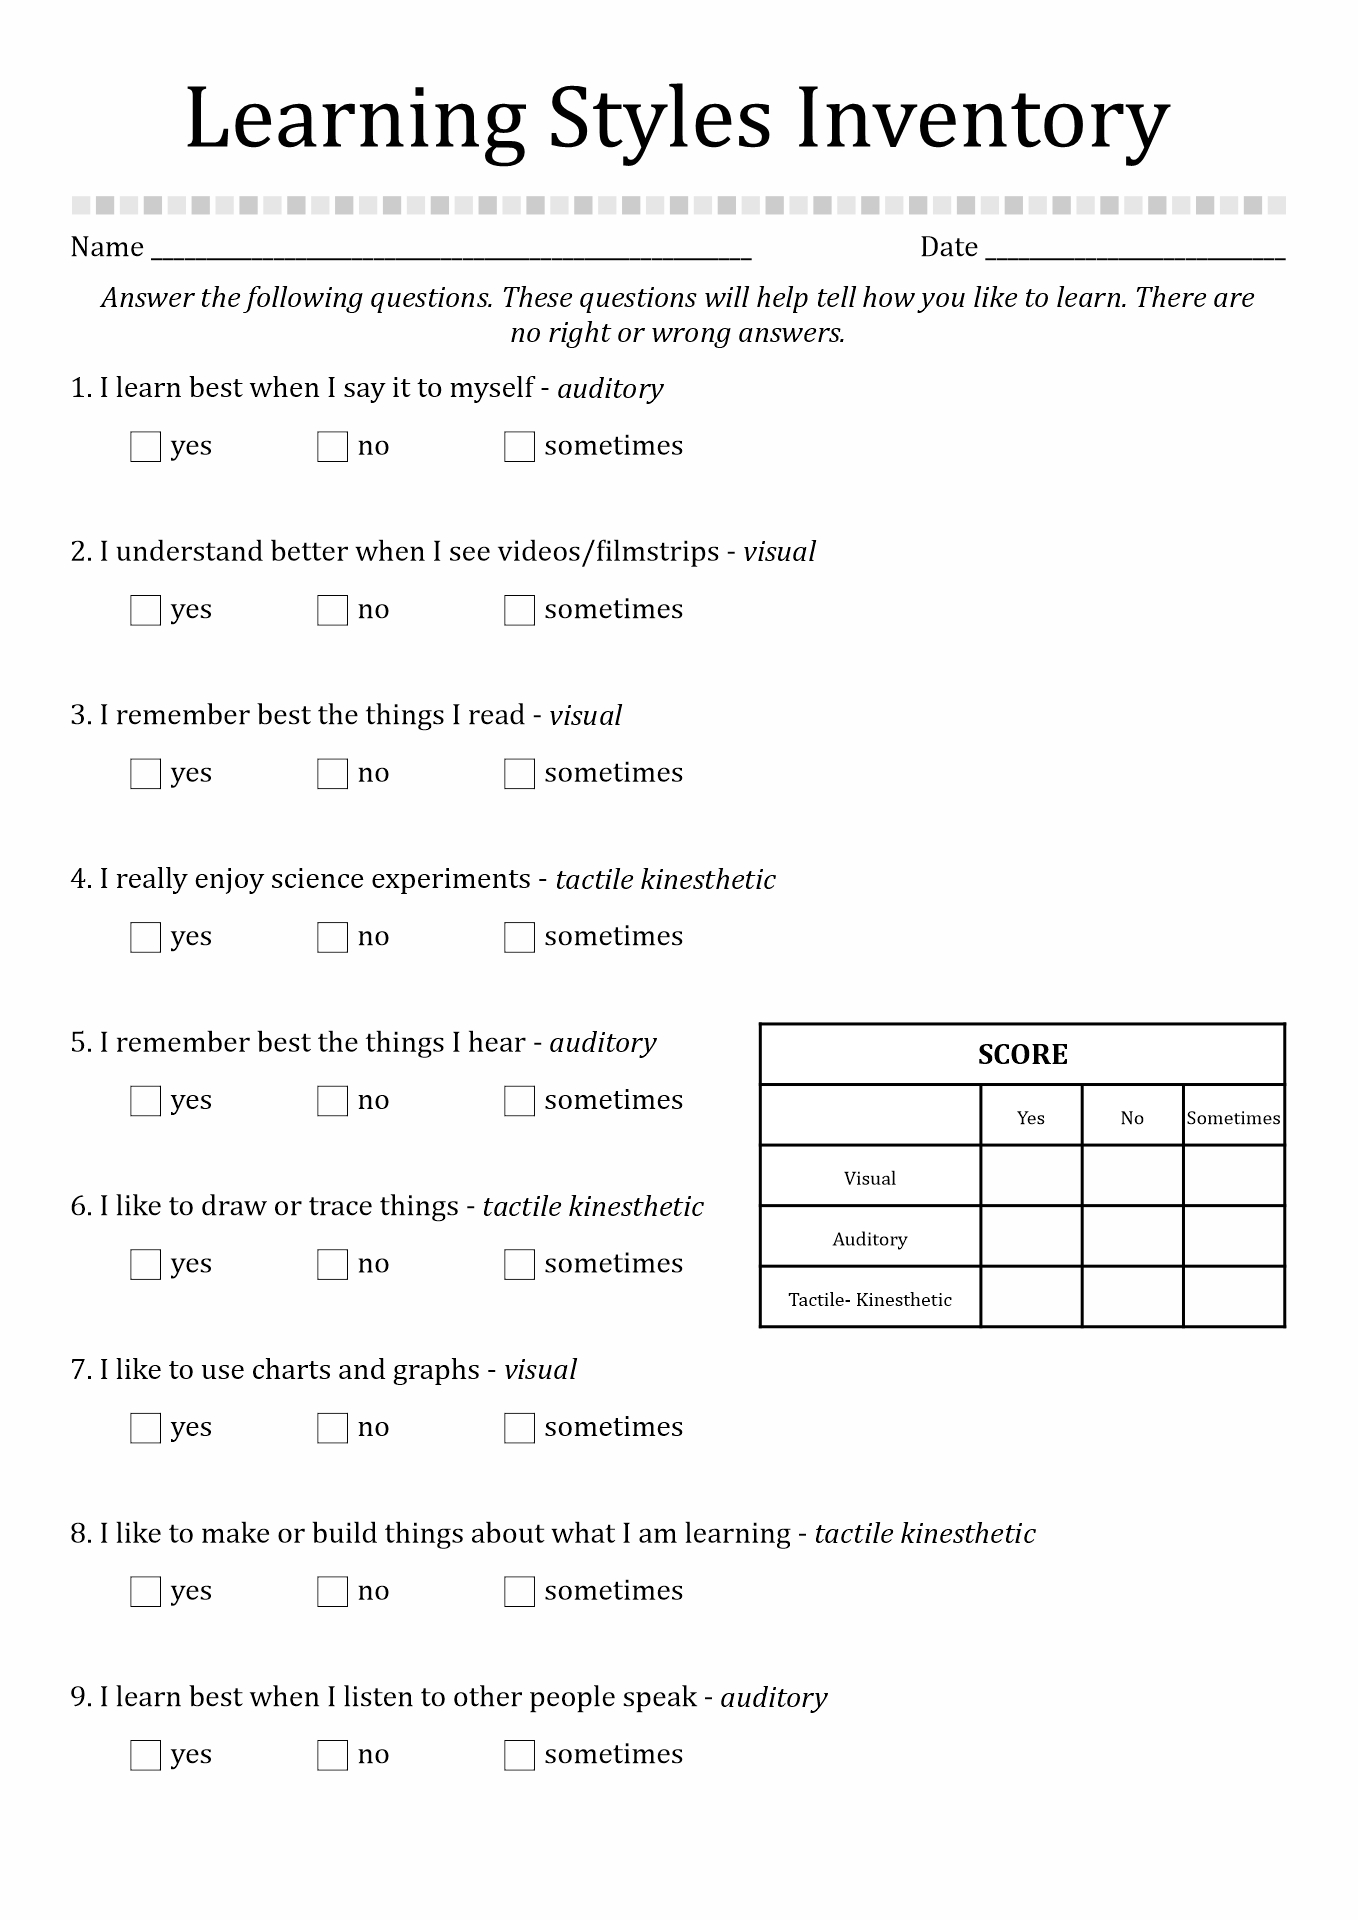 Free Printable Learning Styles Inventory For High School Students